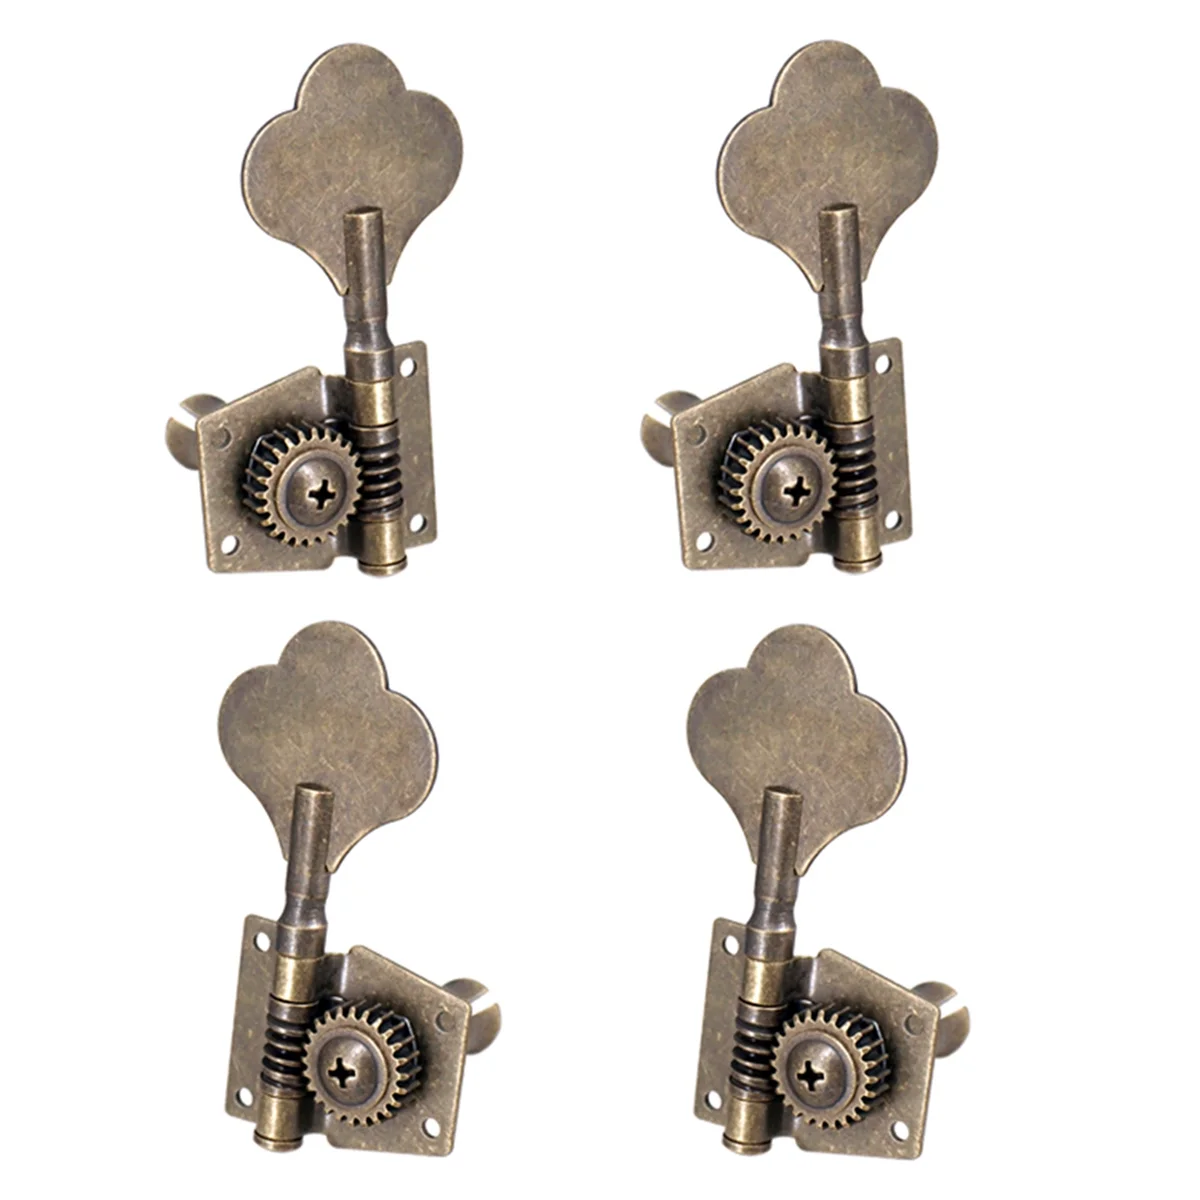 

Guitar Vintage Open Bass Guitar Tuning Key Pegs Machine Heads Tuners 2L2R for 4 Strings Bass Bronze